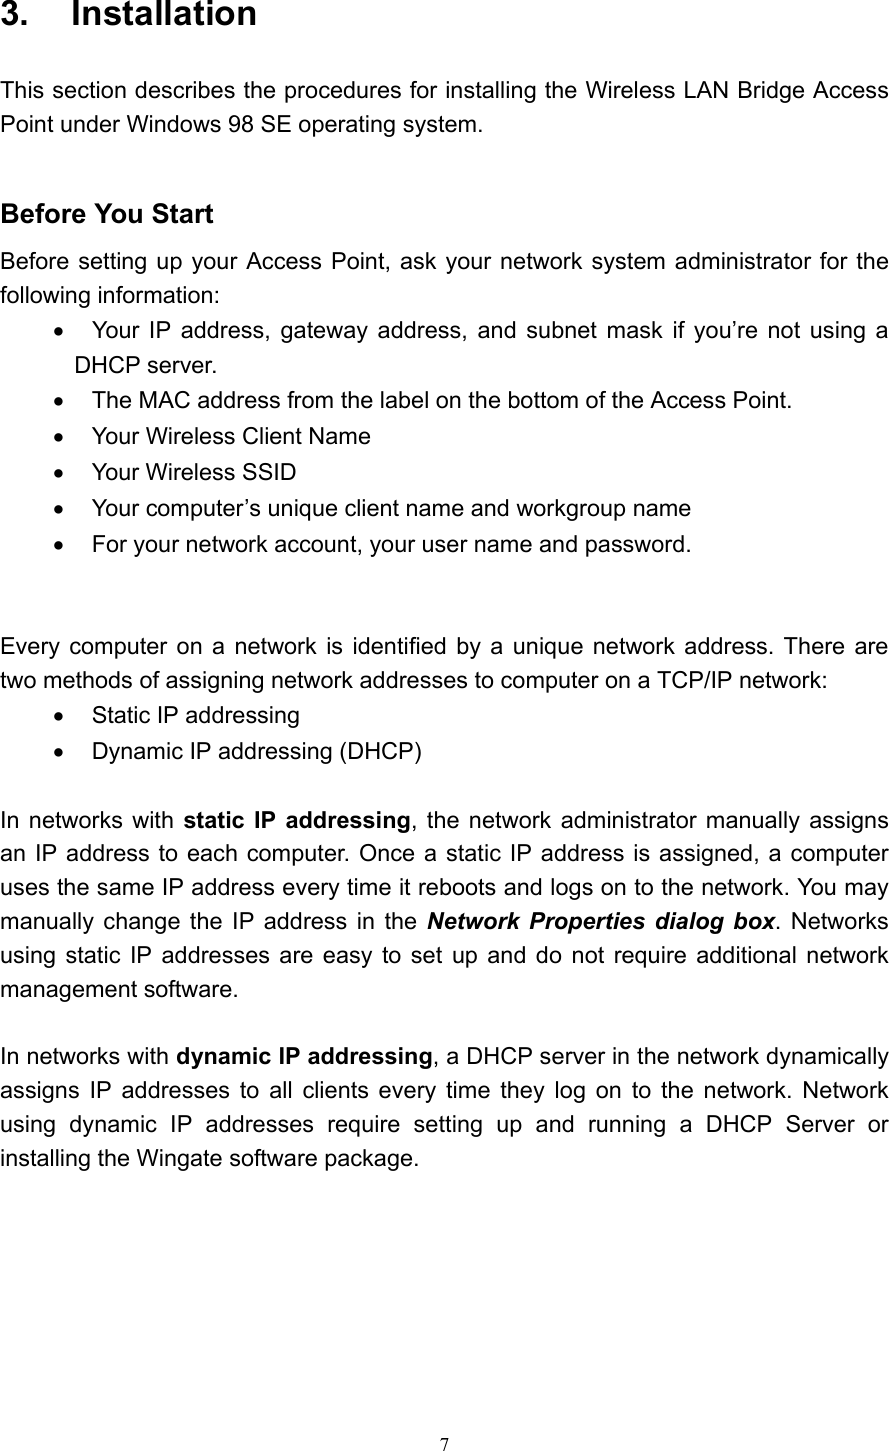   7 3.  Installation  This section describes the procedures for installing the Wireless LAN Bridge Access Point under Windows 98 SE operating system.     Before You Start Before setting up your Access Point, ask your network system administrator for the following information: •    Your IP address, gateway address, and subnet mask if you’re not using a DHCP server. •    The MAC address from the label on the bottom of the Access Point. •    Your Wireless Client Name •  Your Wireless SSID •    Your computer’s unique client name and workgroup name •    For your network account, your user name and password.   Every computer on a network is identified by a unique network address. There are two methods of assigning network addresses to computer on a TCP/IP network: •  Static IP addressing •  Dynamic IP addressing (DHCP)  In networks with static IP addressing, the network administrator manually assigns an IP address to each computer. Once a static IP address is assigned, a computer uses the same IP address every time it reboots and logs on to the network. You may manually change the IP address in the Network Properties dialog box. Networks using static IP addresses are easy to set up and do not require additional network management software.  In networks with dynamic IP addressing, a DHCP server in the network dynamically assigns IP addresses to all clients every time they log on to the network. Network using dynamic IP addresses require setting up and running a DHCP Server or installing the Wingate software package.         